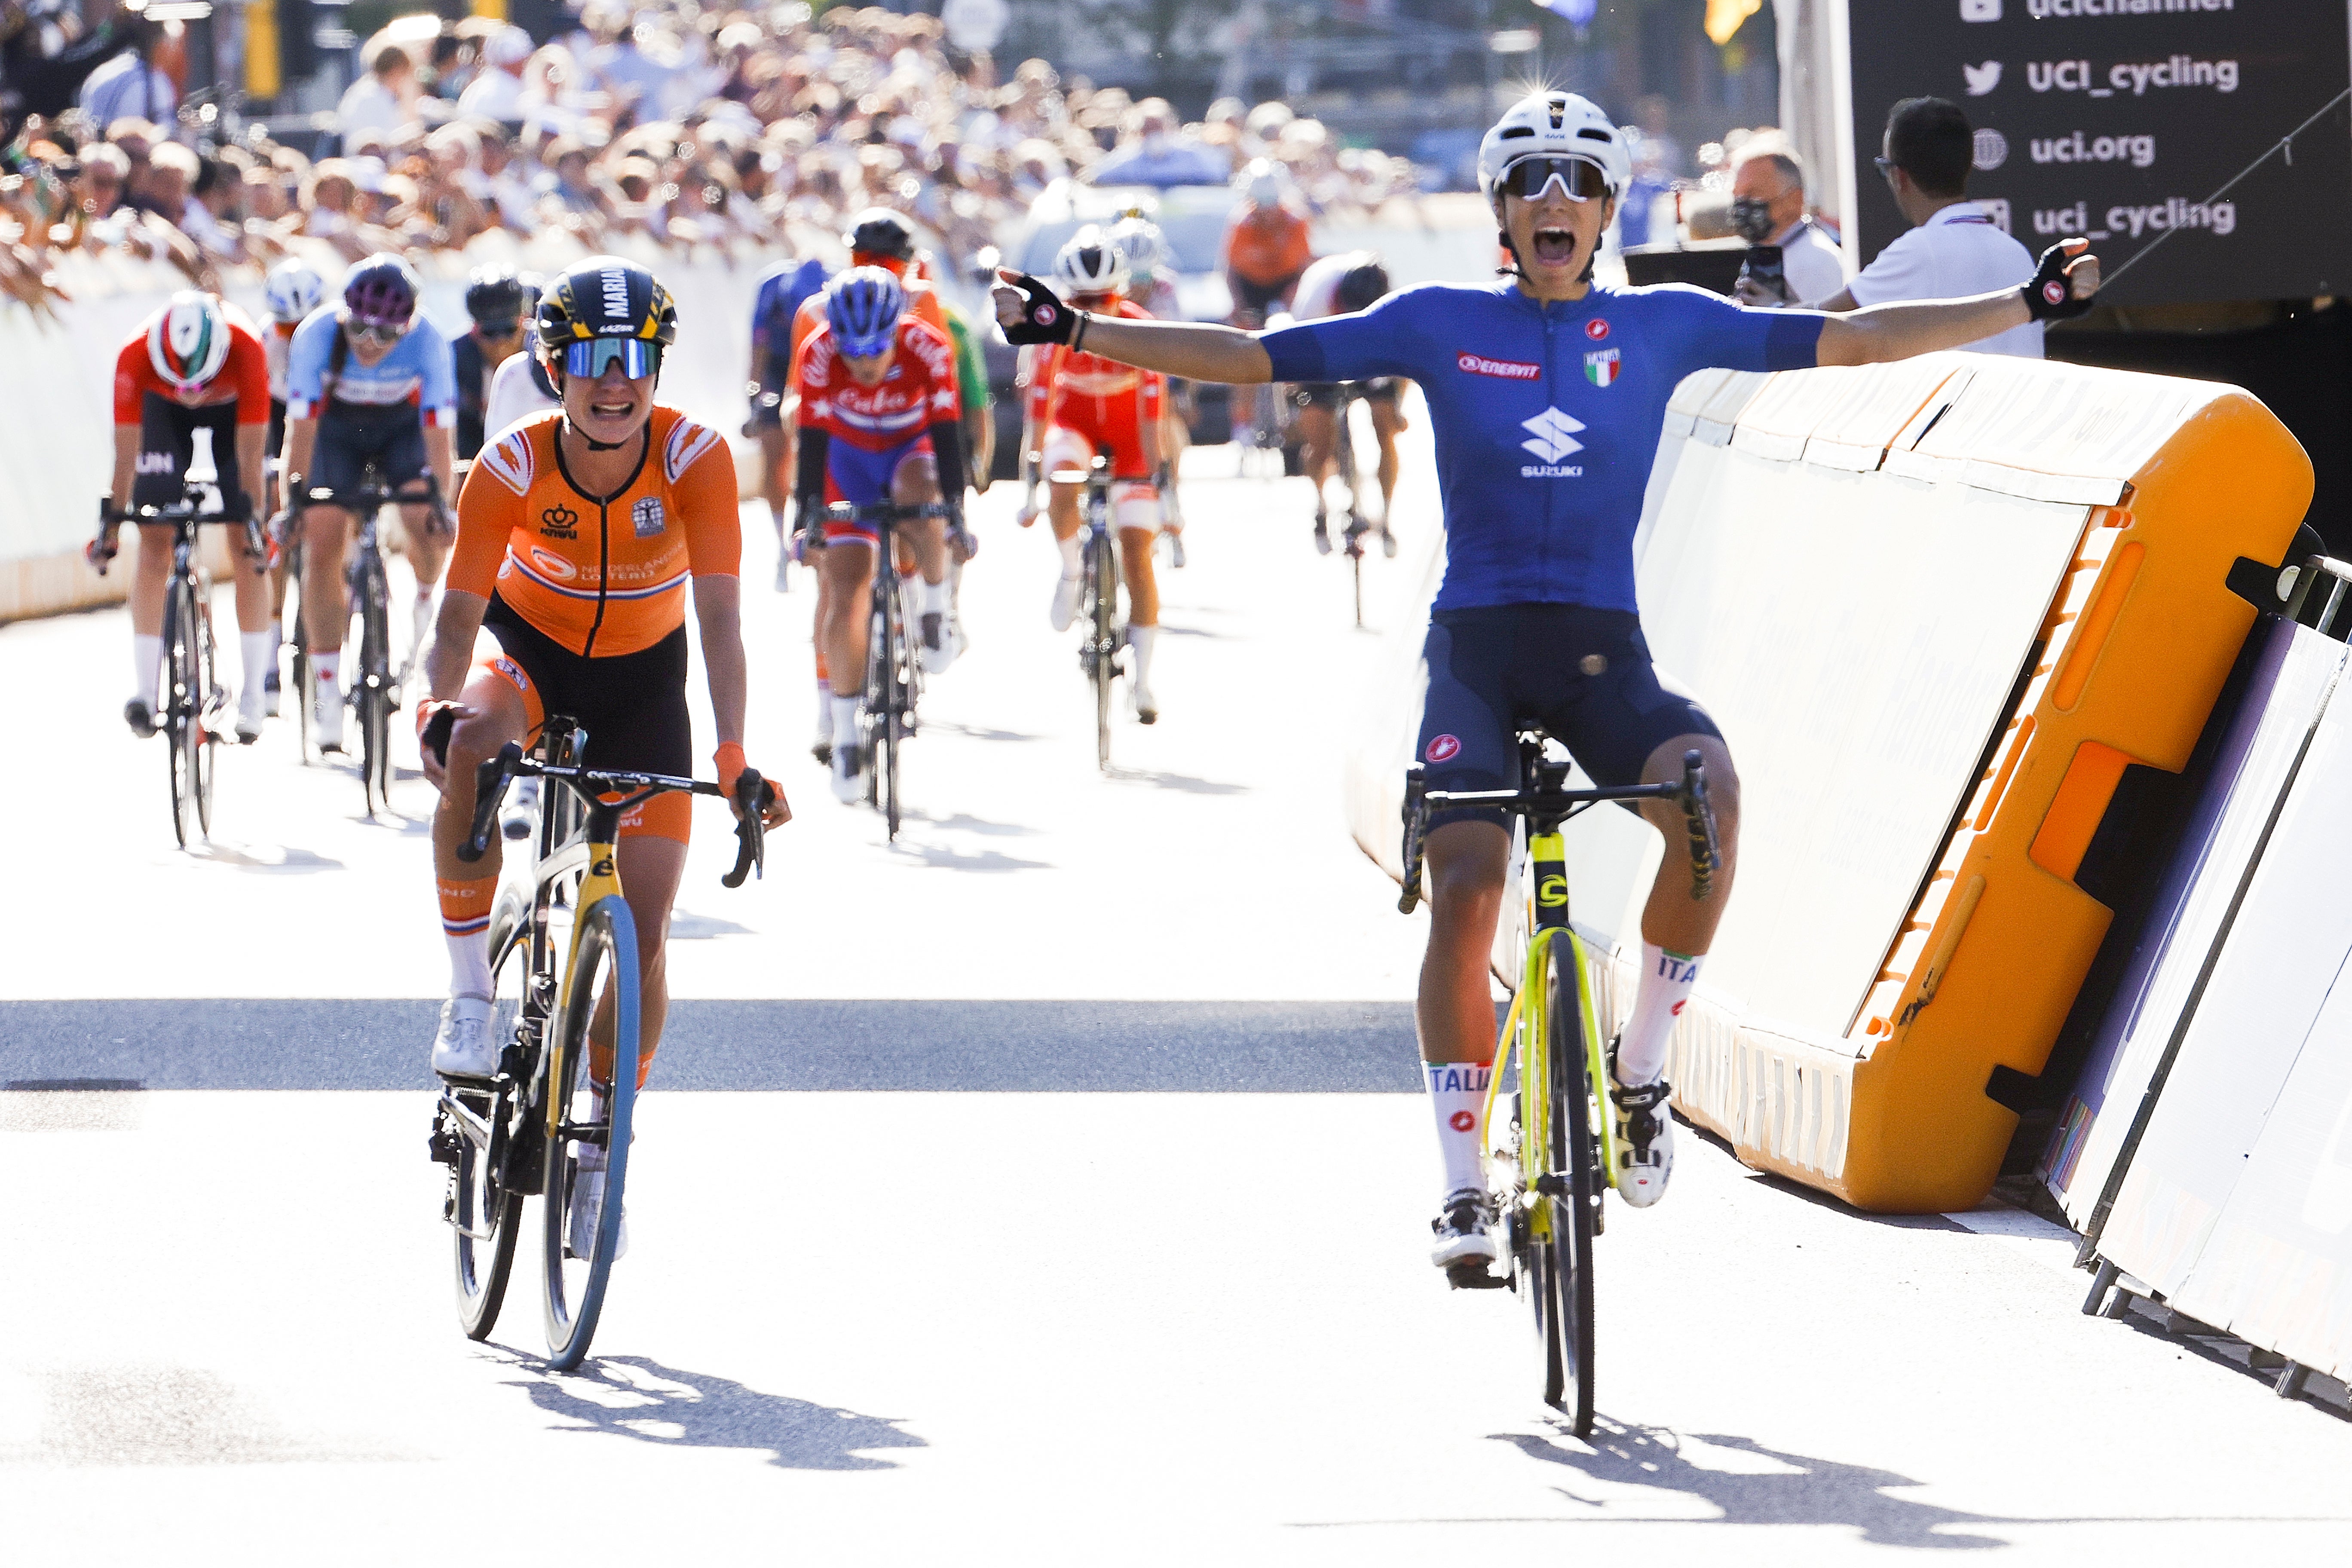 Elisa Balsamo of Italy crosses the finish line ahead of Marianne Vos to win the women’s road race at the World Road Cycling Championships (Olivier Matthys/AP)